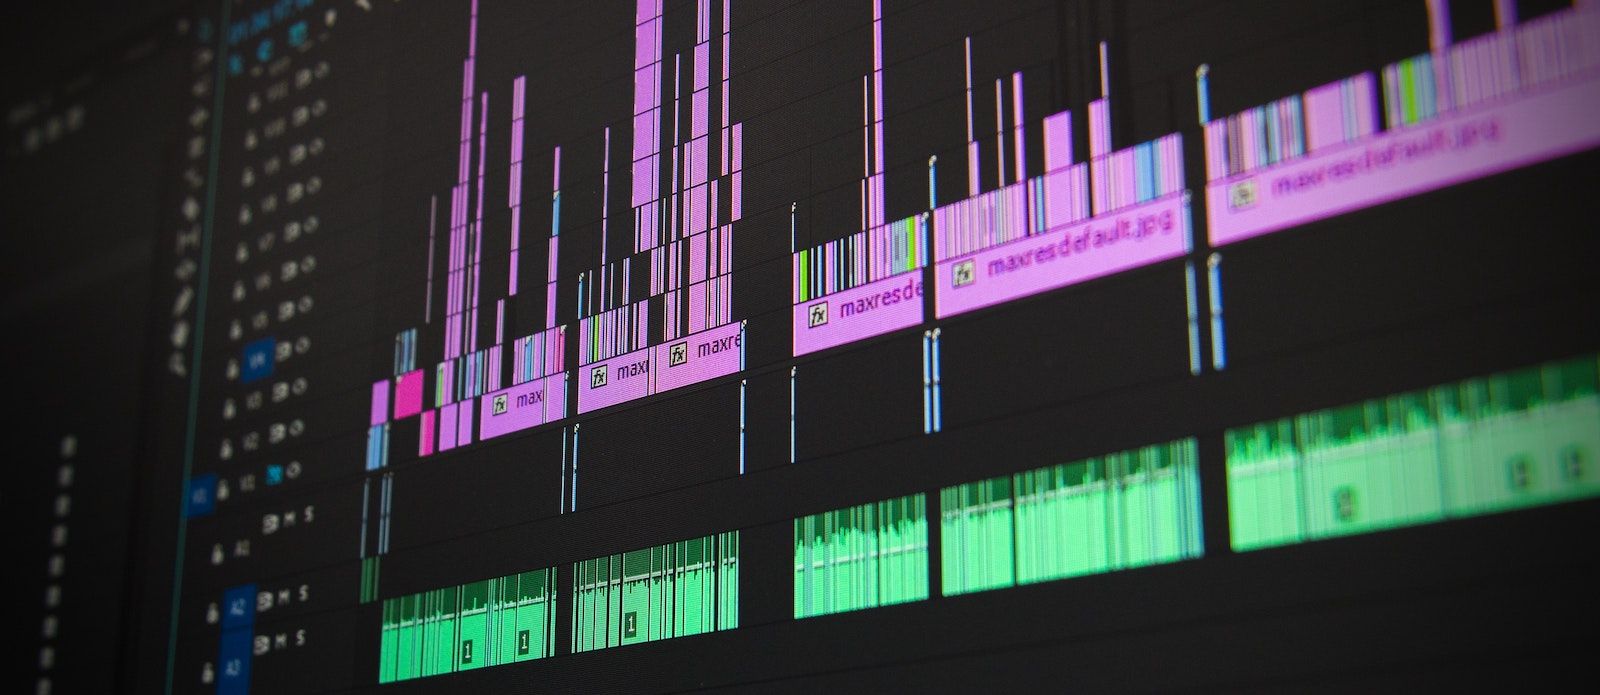 Picture of a Video Editing Program - Inbound Content Marketing Strategy for Higher Education